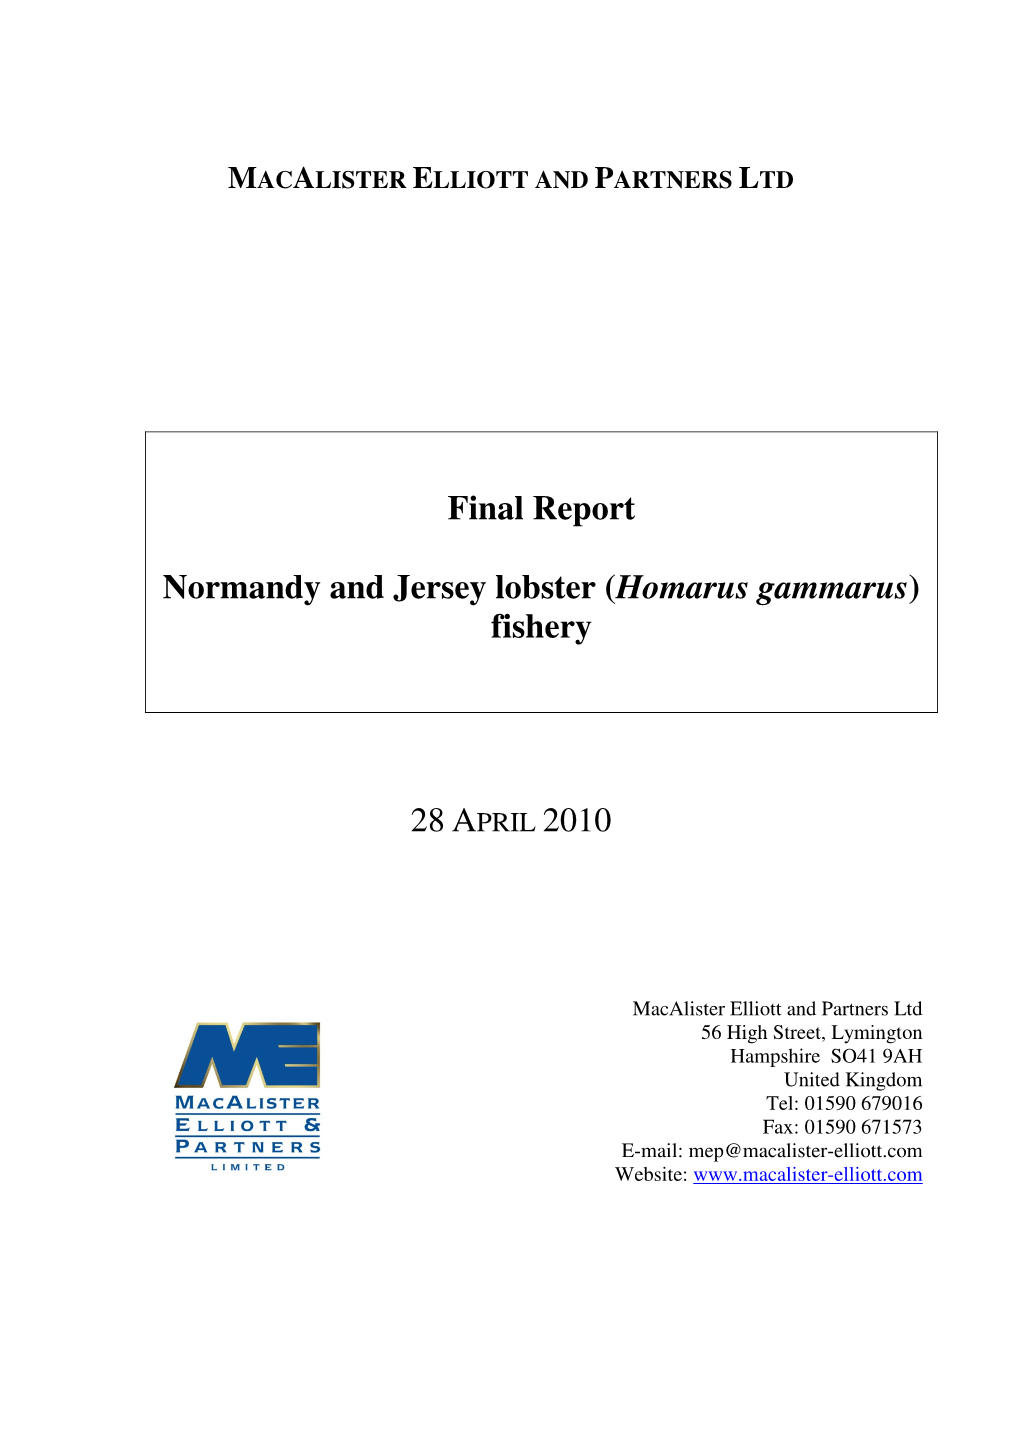 Final Report Normandy and Jersey Lobster